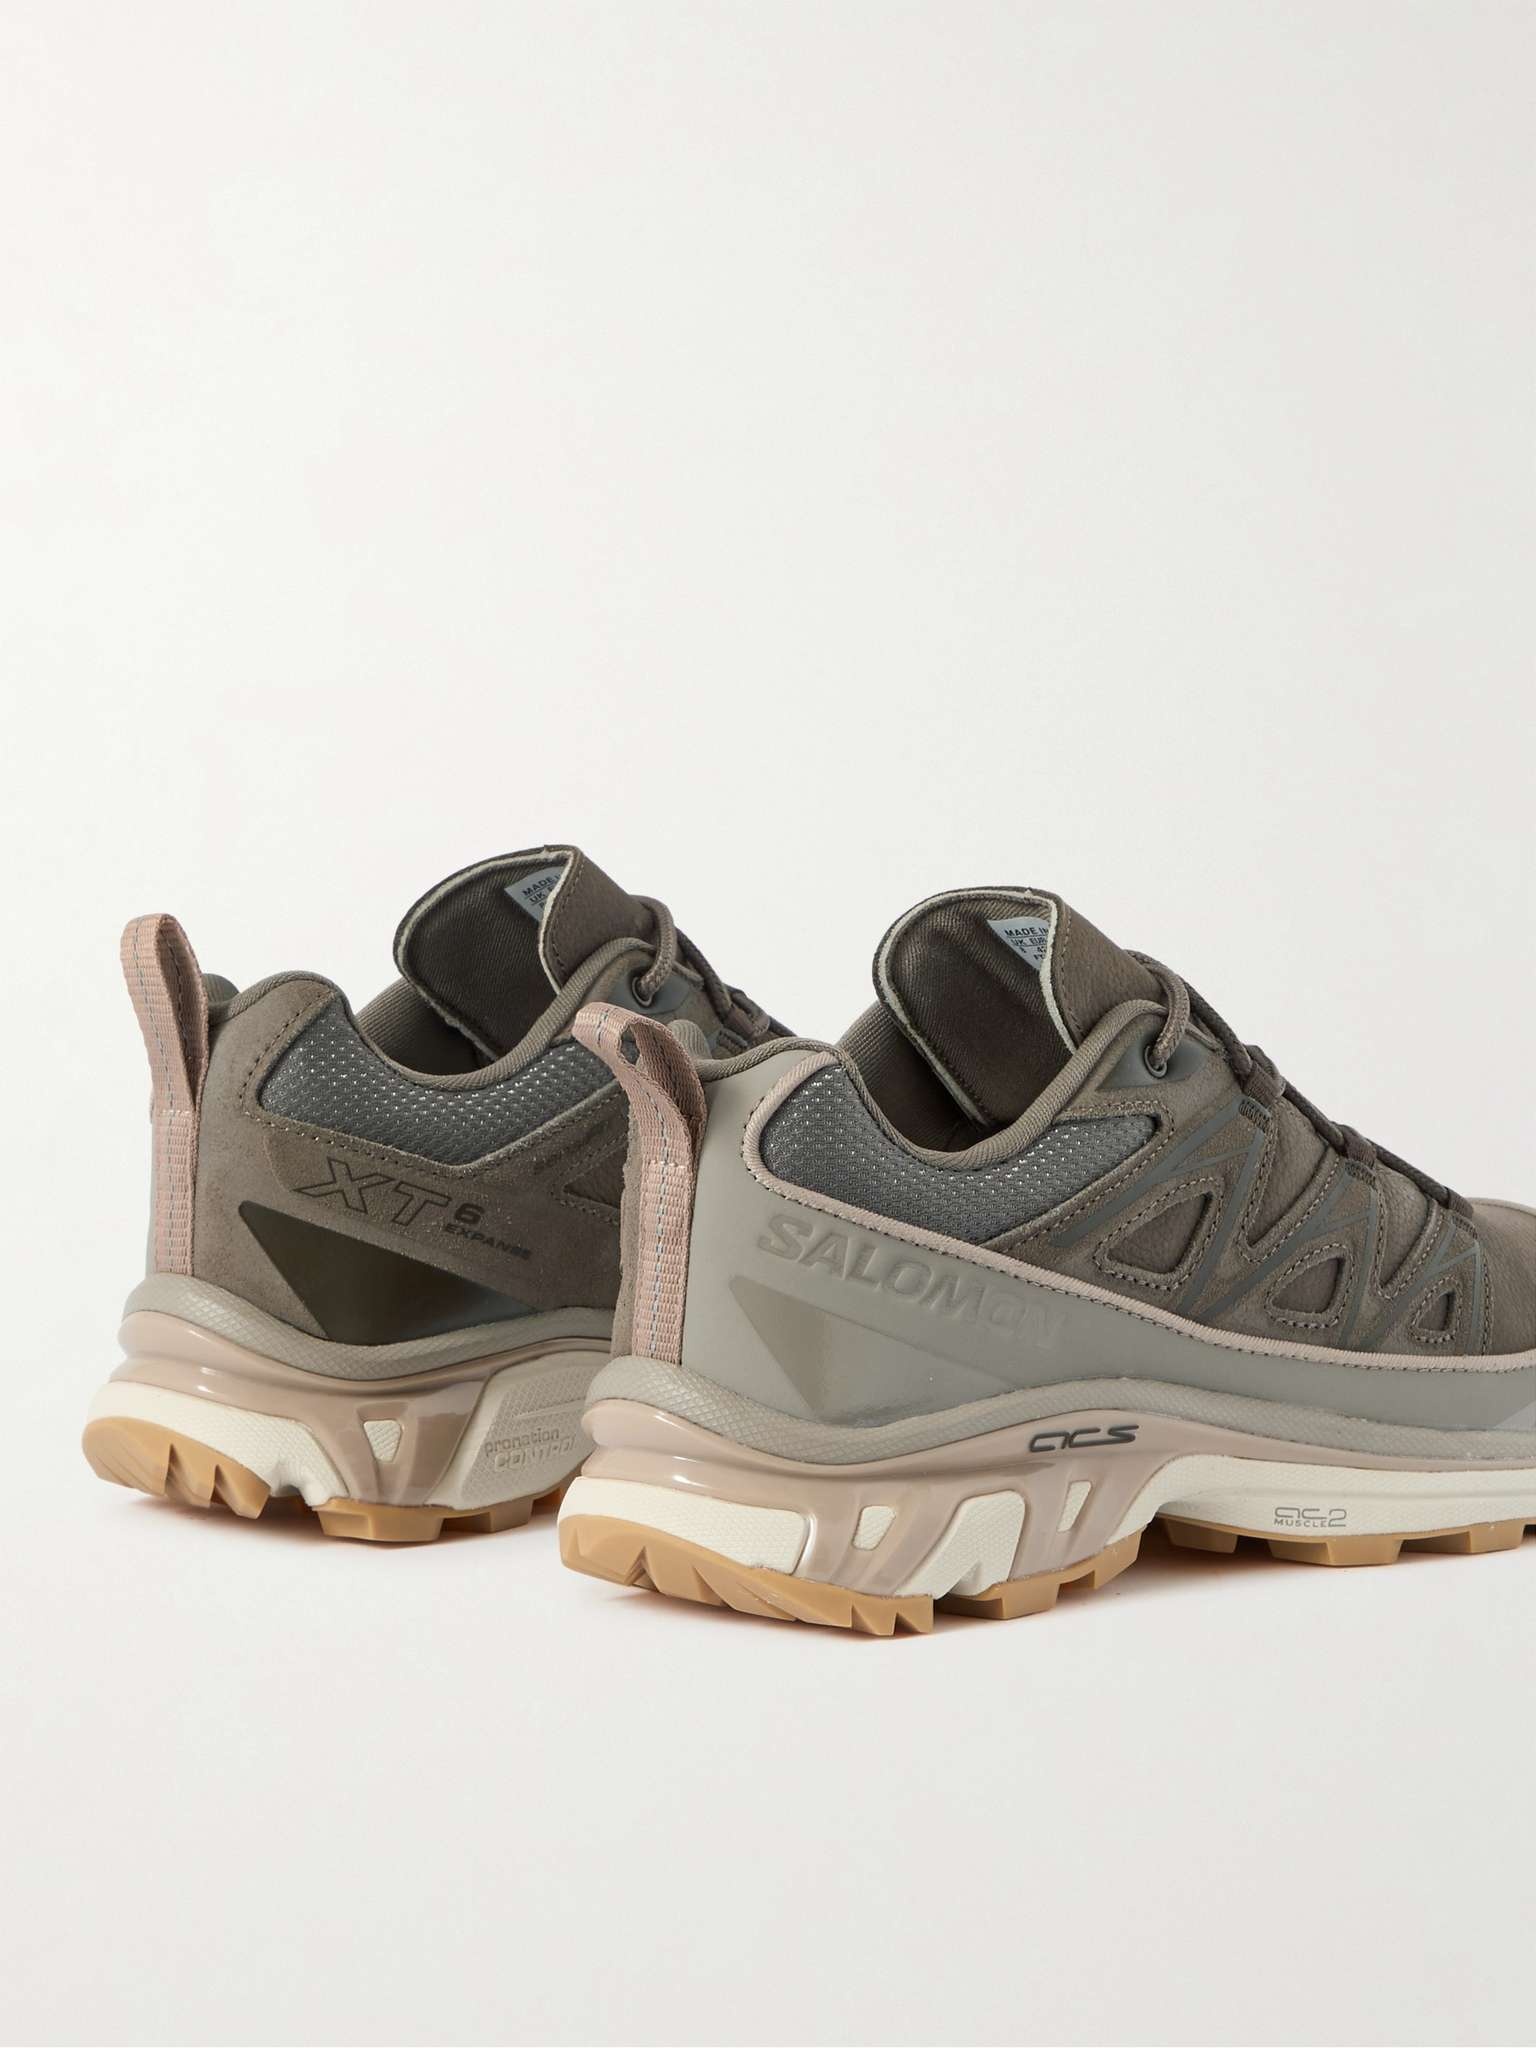 XT-6 Expanse LTR Mesh-Trimmed Suede and Leather Sneakers - 5